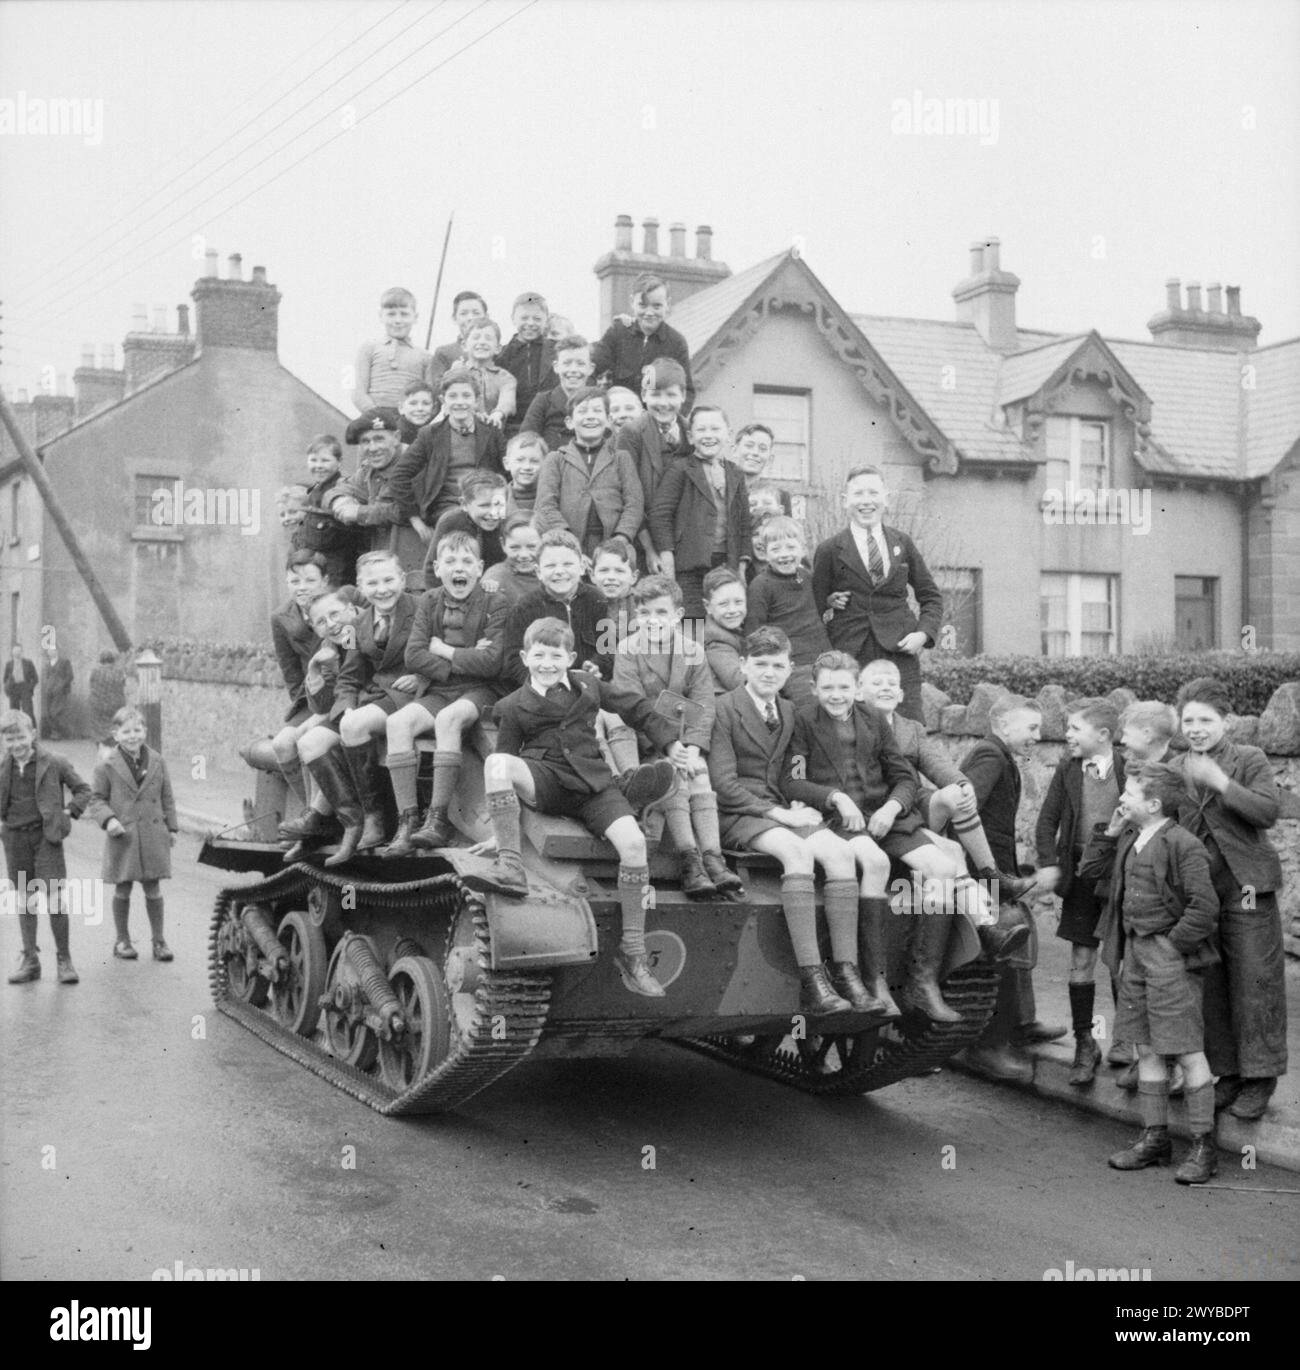 THE BRITISH ARMY IN THE UNITED KINGDOM 1939-45 - Small boys cover a Light Tank Mk VI of 2nd Fife and Forfar Yeomanry, Royal Armoured Corps, at Bessbrook in Armagh, Northern Ireland, 25 March 1941. , British Army, 2nd Fife and Forfar Yeomanry Stock Photo